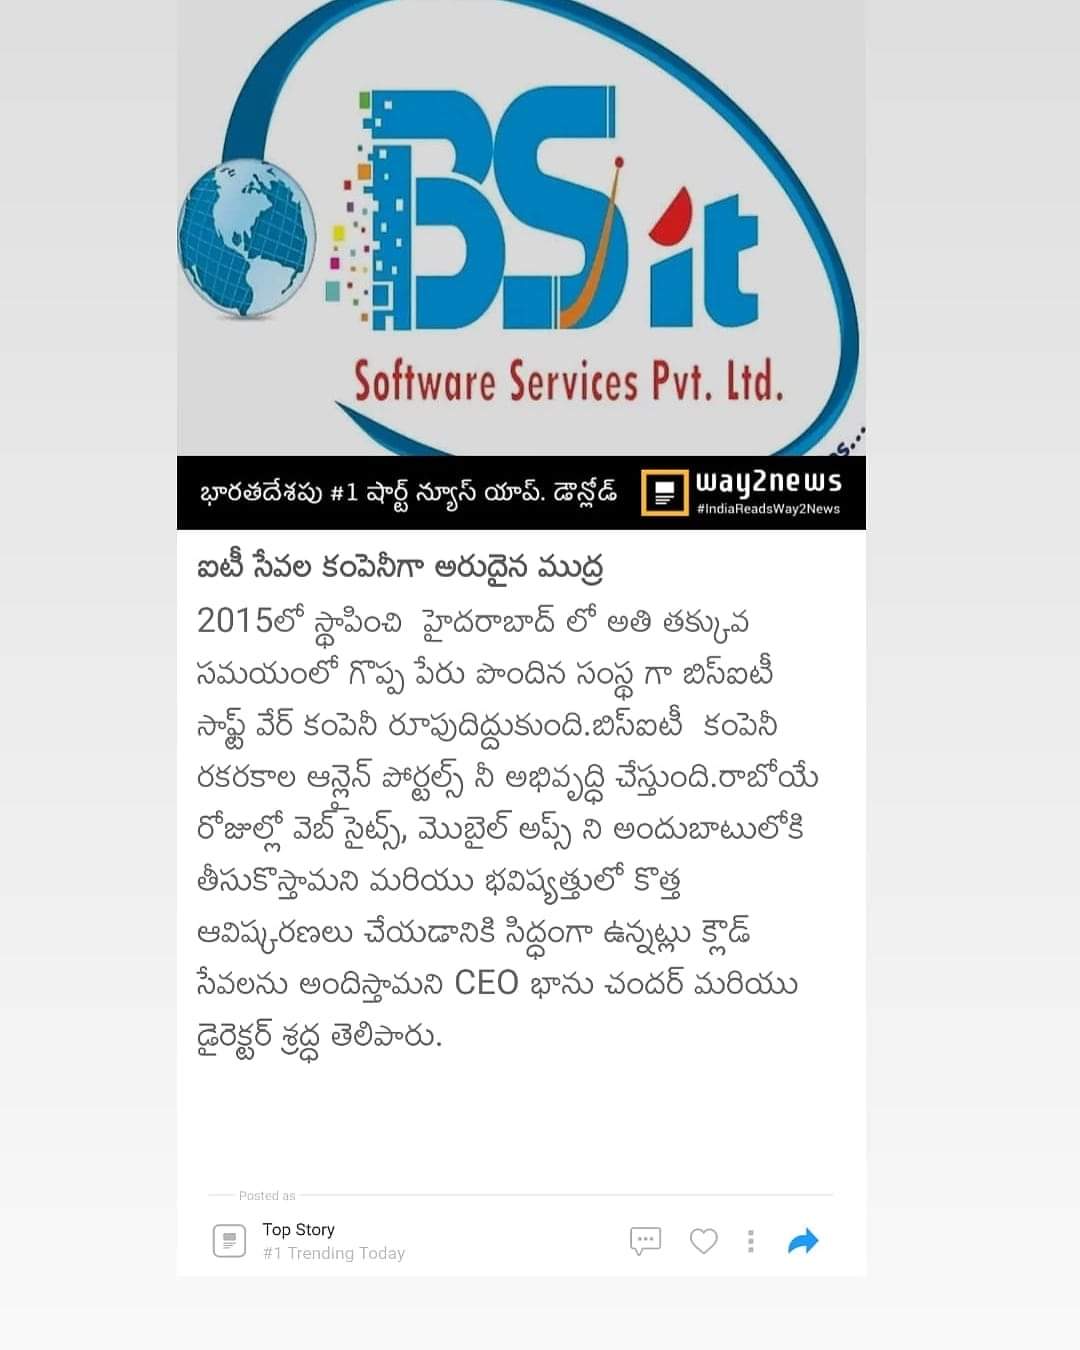 News2_BSIT_Software_Services_Web_And_App_Development_Company_In_India